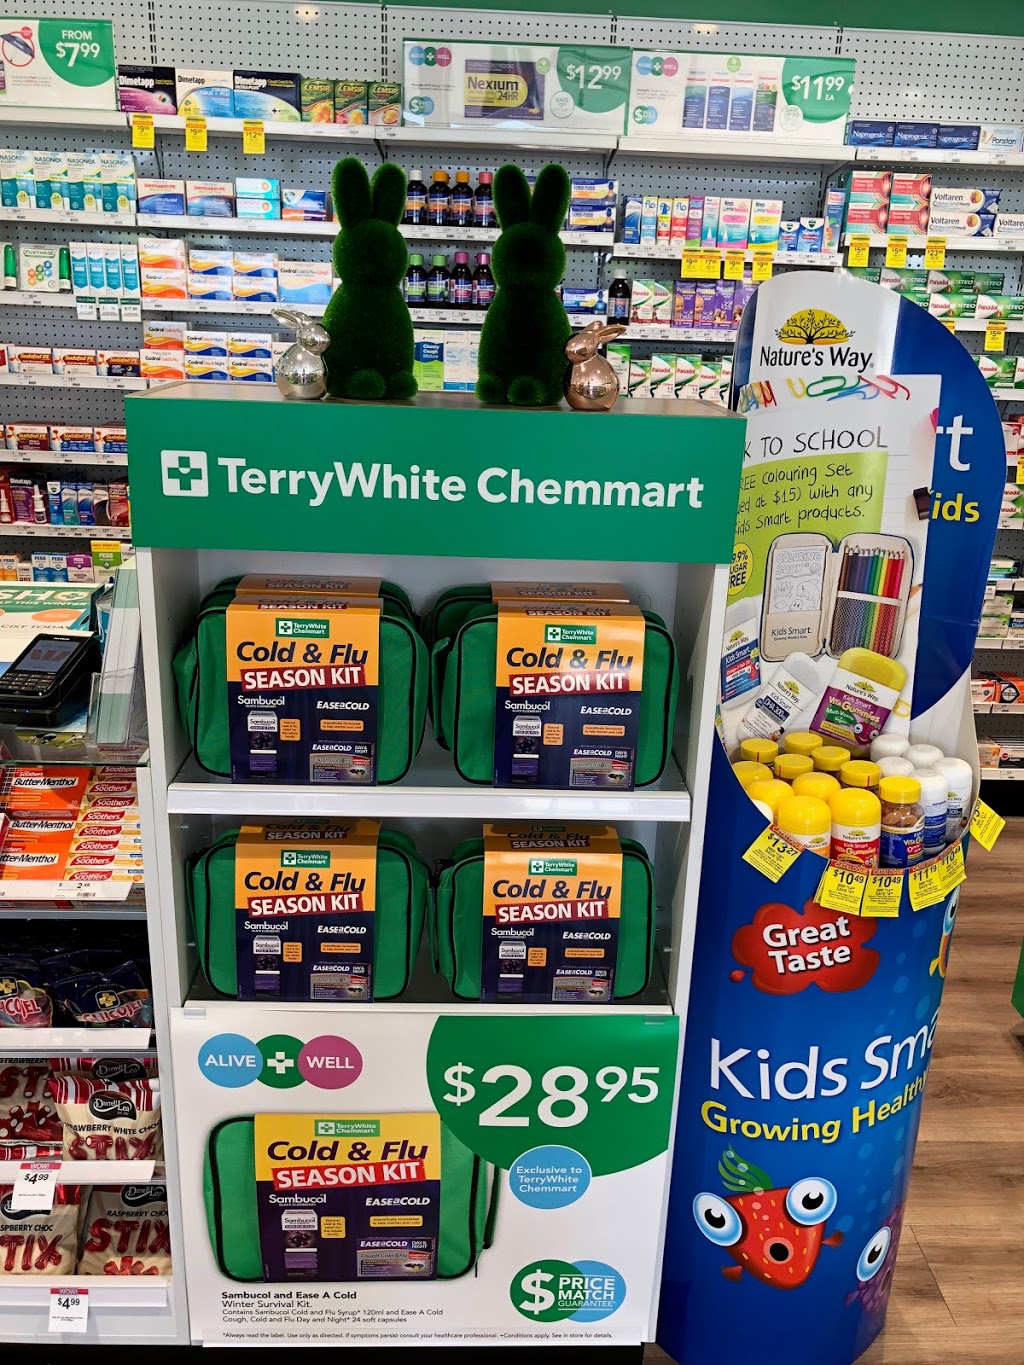 TerryWhite Chemmart Manly | Compounding Pharmacy | 10 Manly Rd, Manly QLD 4179, Australia | Phone: (07) 3396 6496